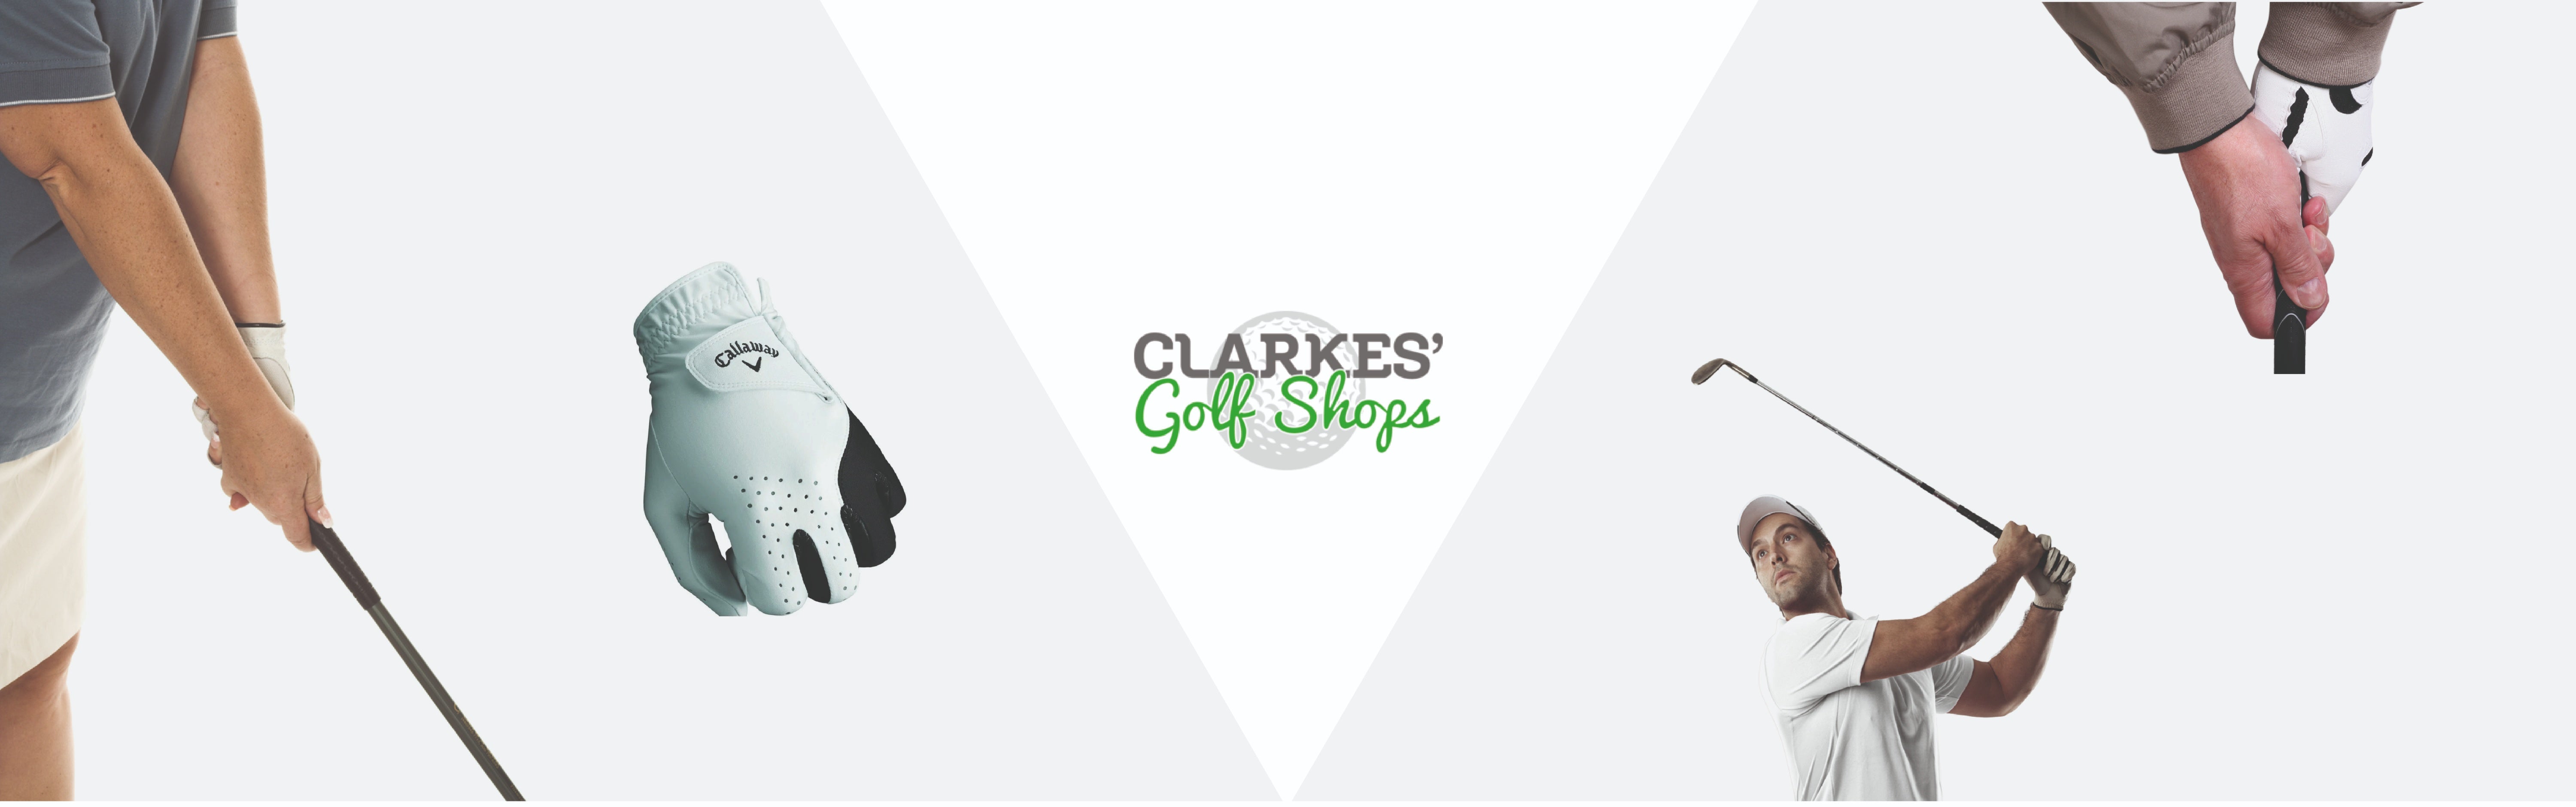 5 Simple Tips To Instantly Improve Your Golf Grip - Clarkes